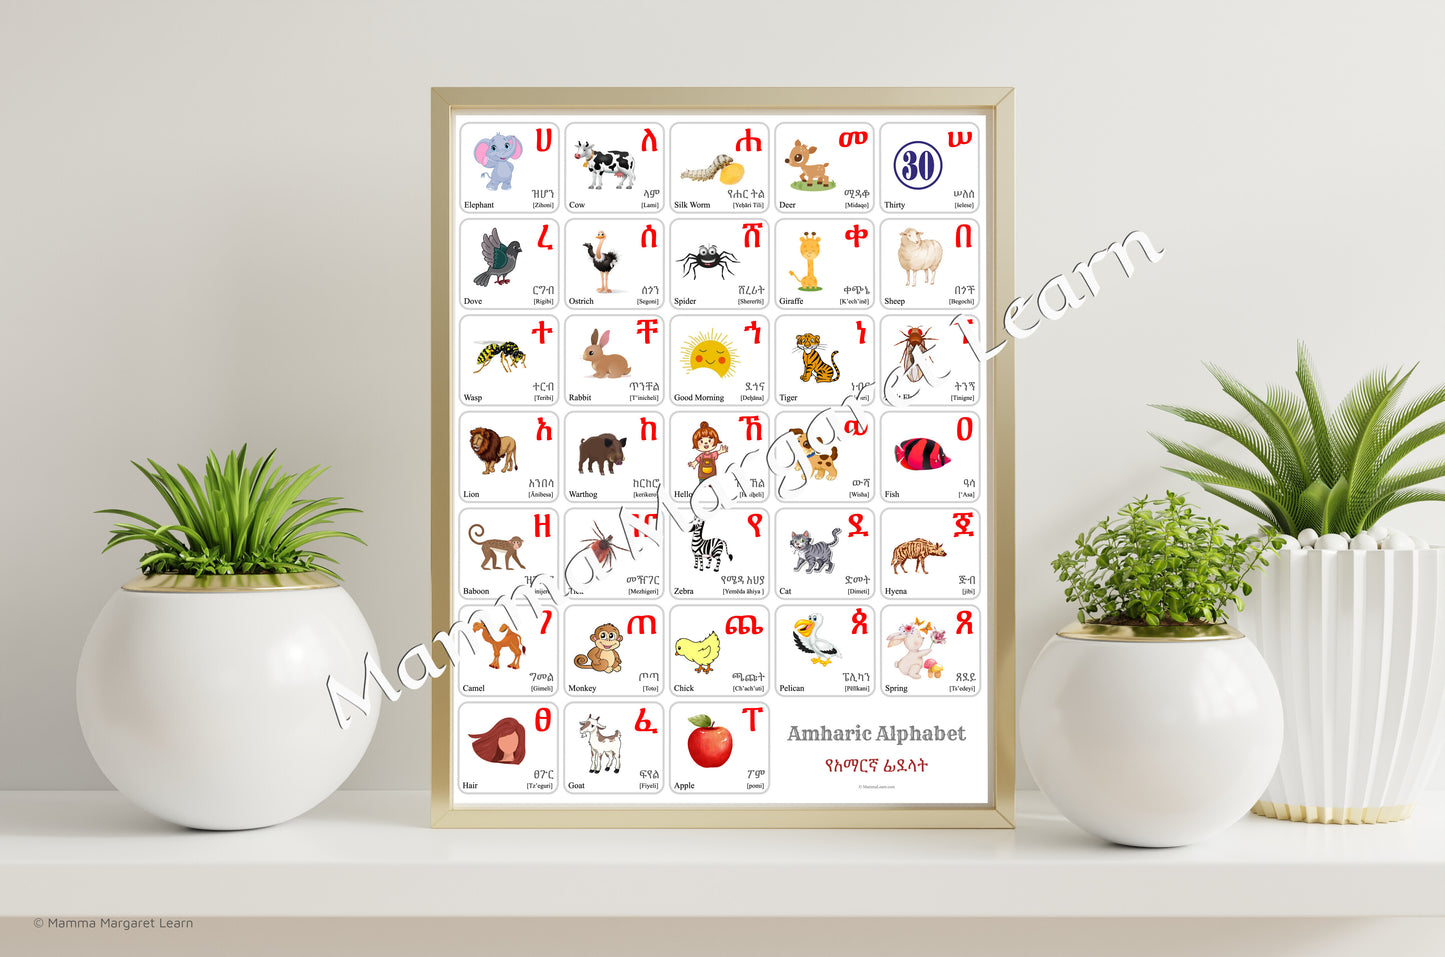 Amharic Alphabet Poster | Chart, Colorful